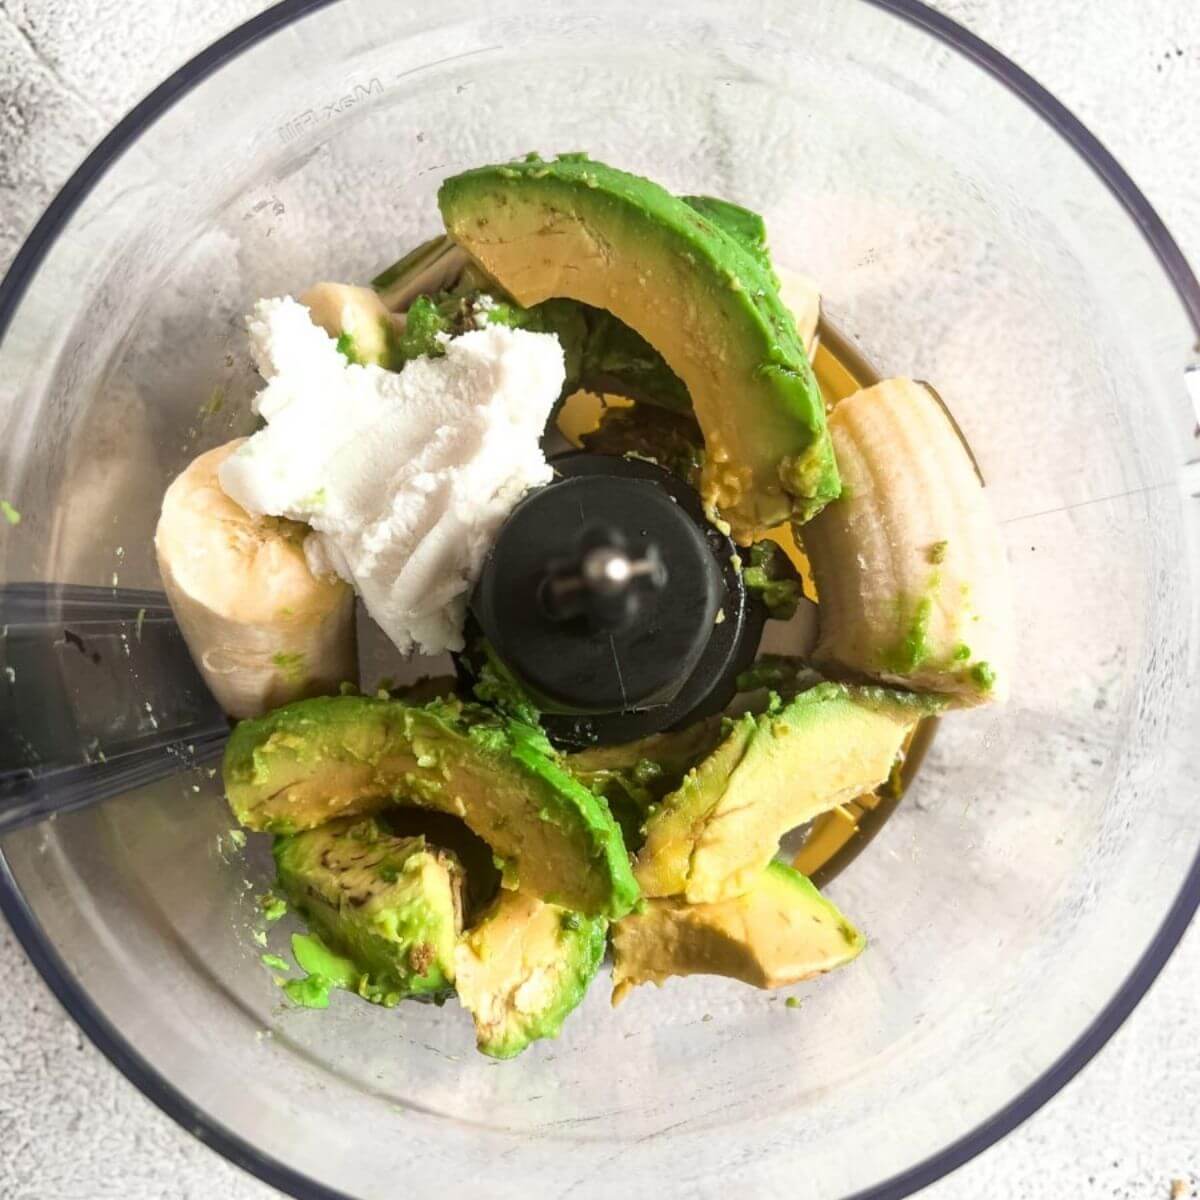 Ingredients for avocado nice cream together in food processor